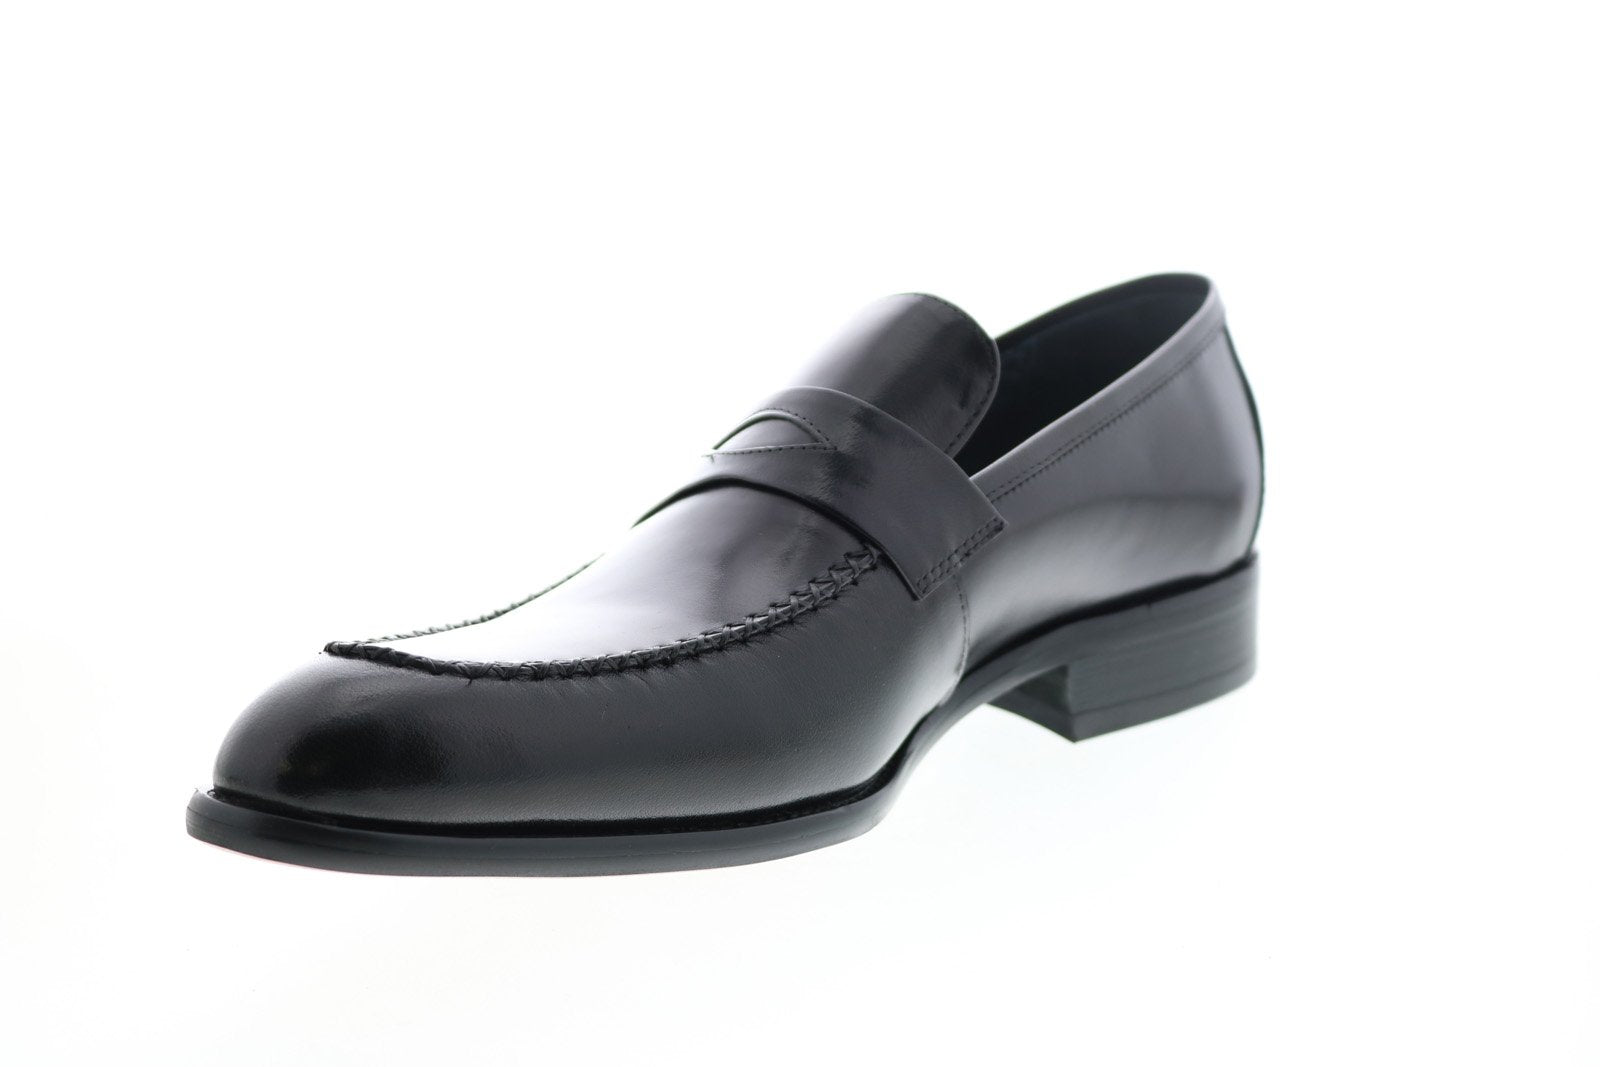 Carrucci KS479-605 Leather Penny Loafers - Black